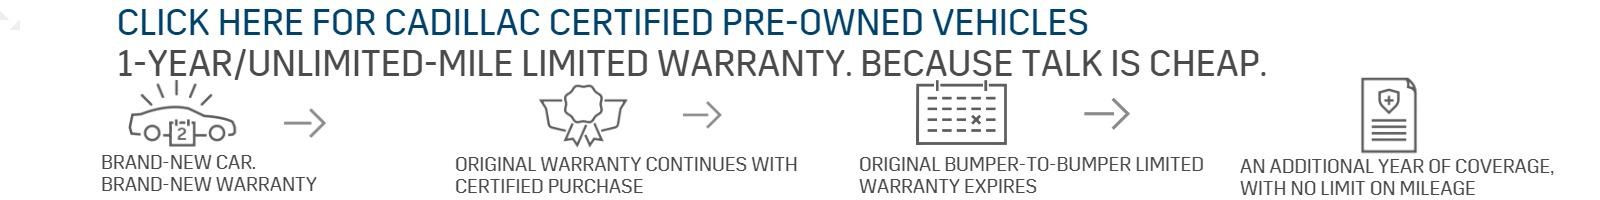 1-YEAR/UNLIMITED-MILE LIMITED WARRANTY2. BECAUSE TALK IS CHEAP